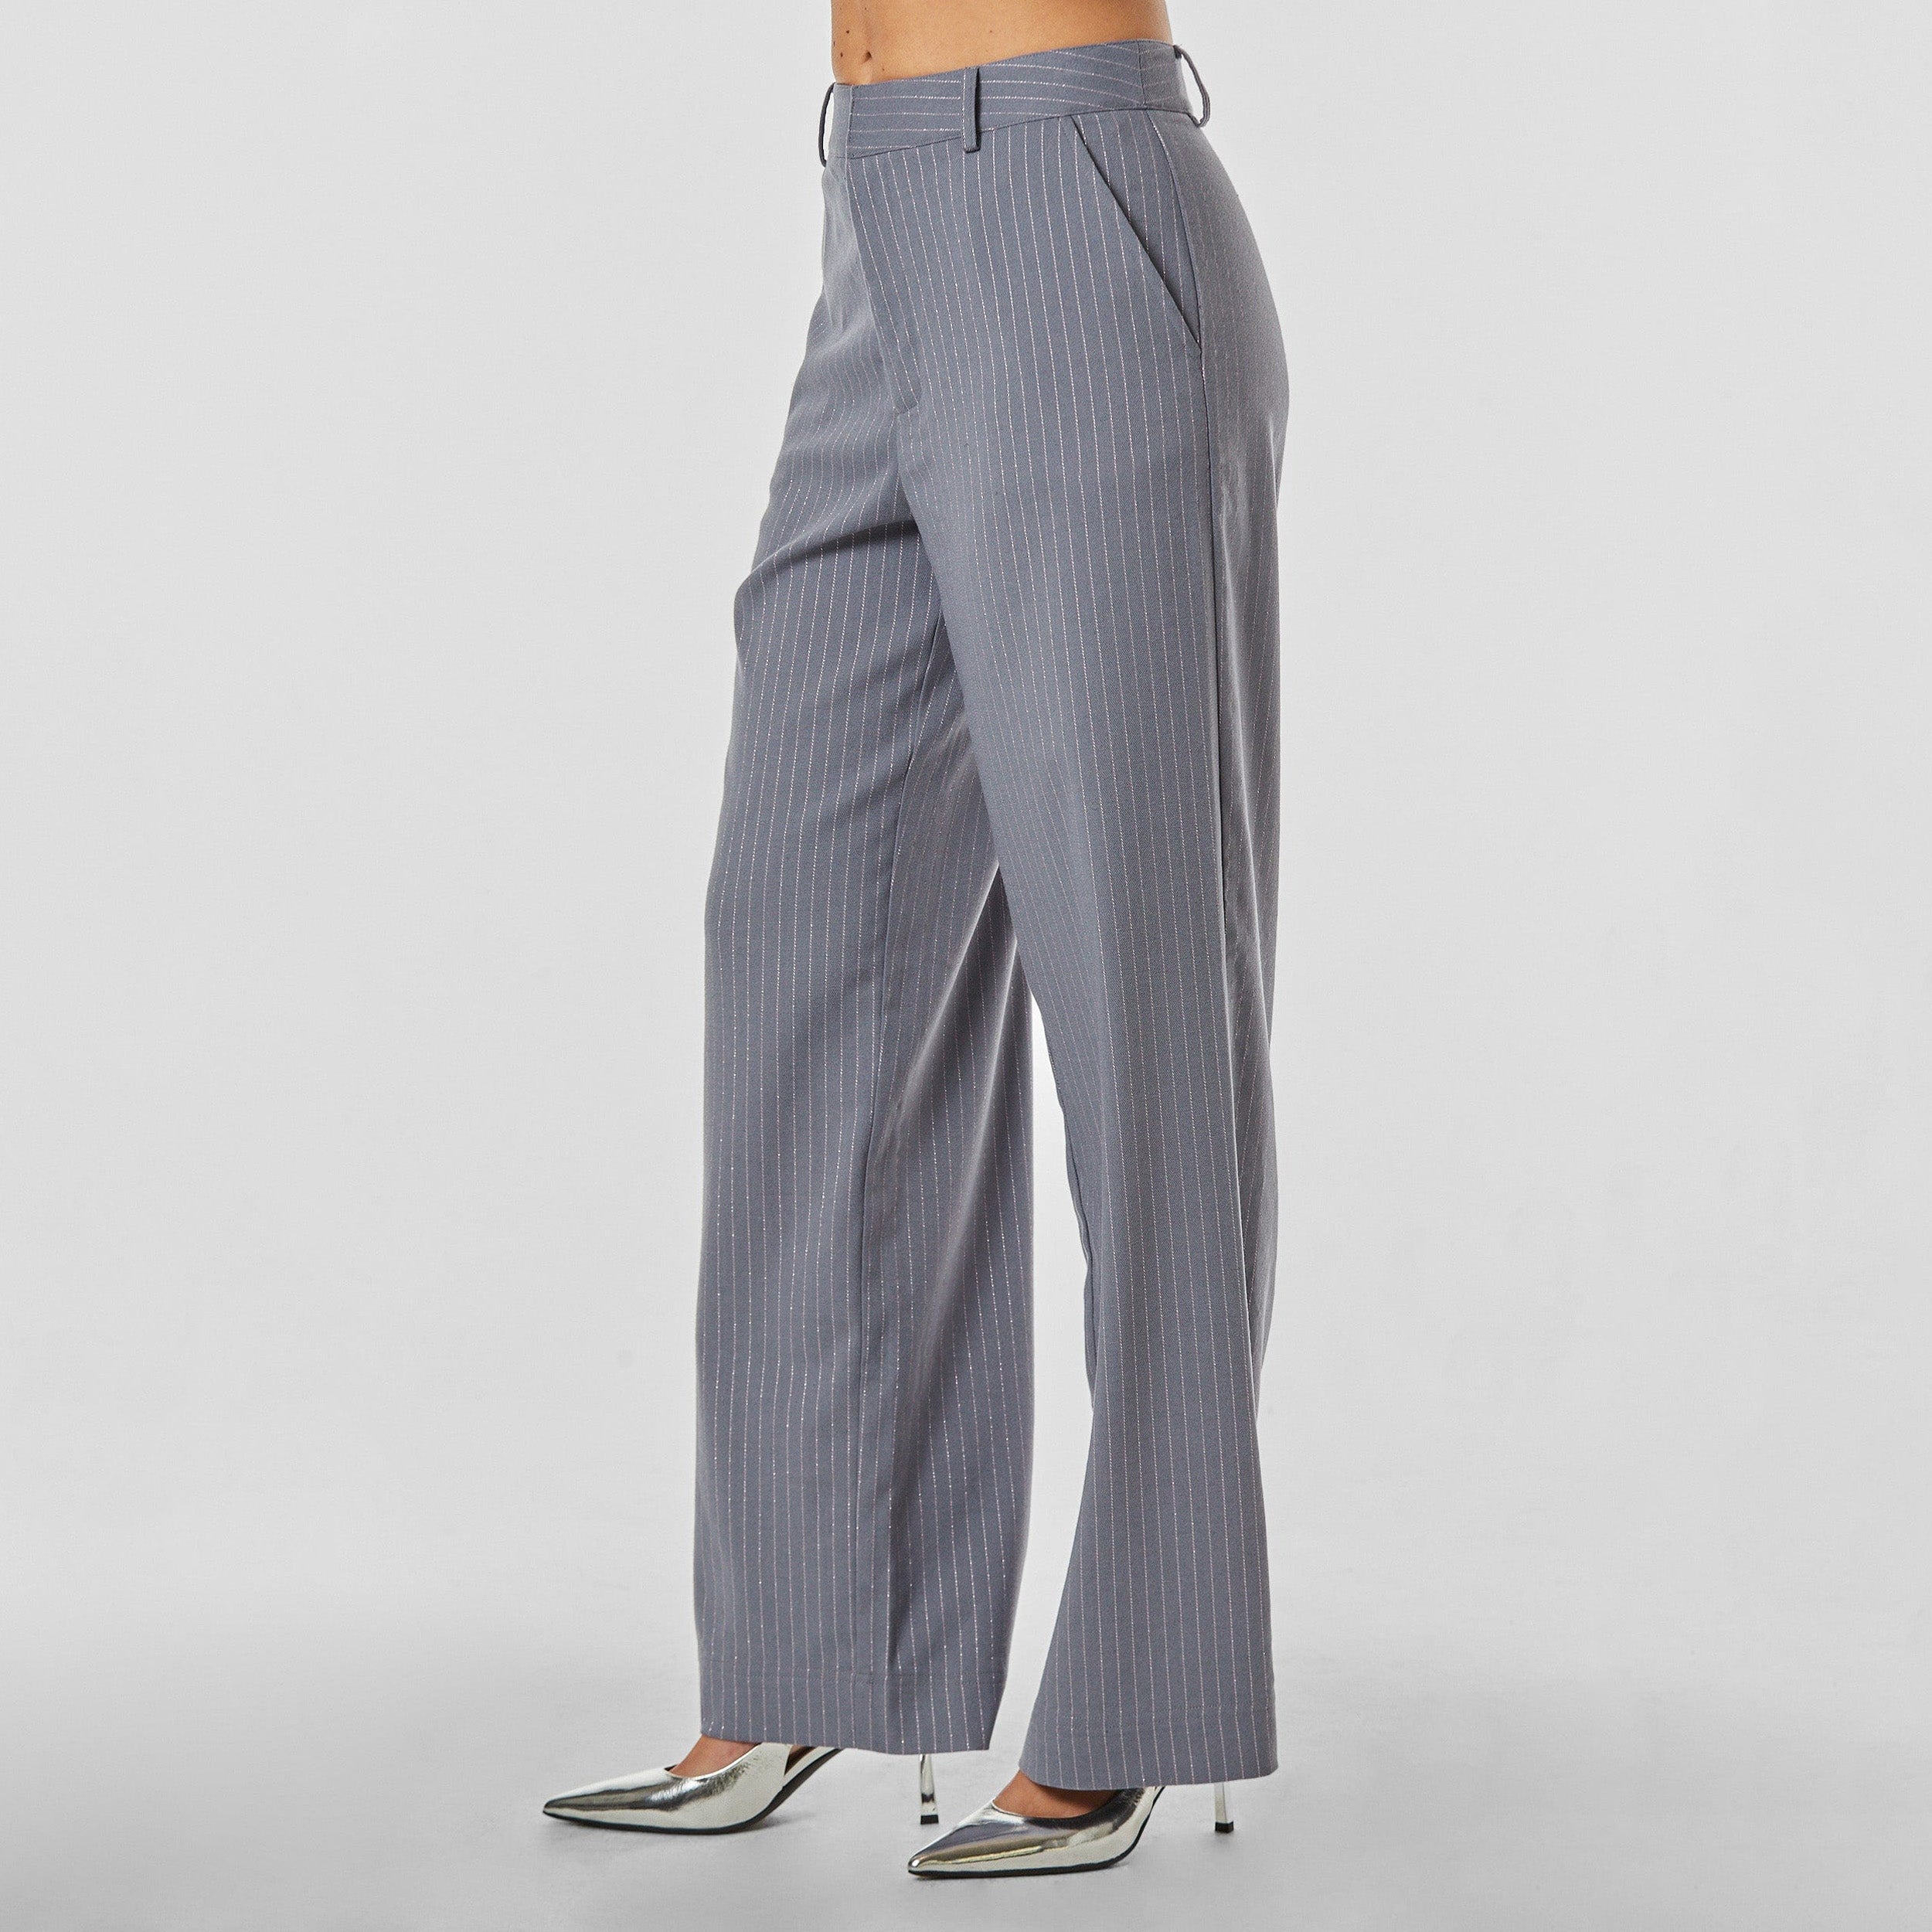 Side view of woman wearing silver pinstripe on grey trouser with oversized fit